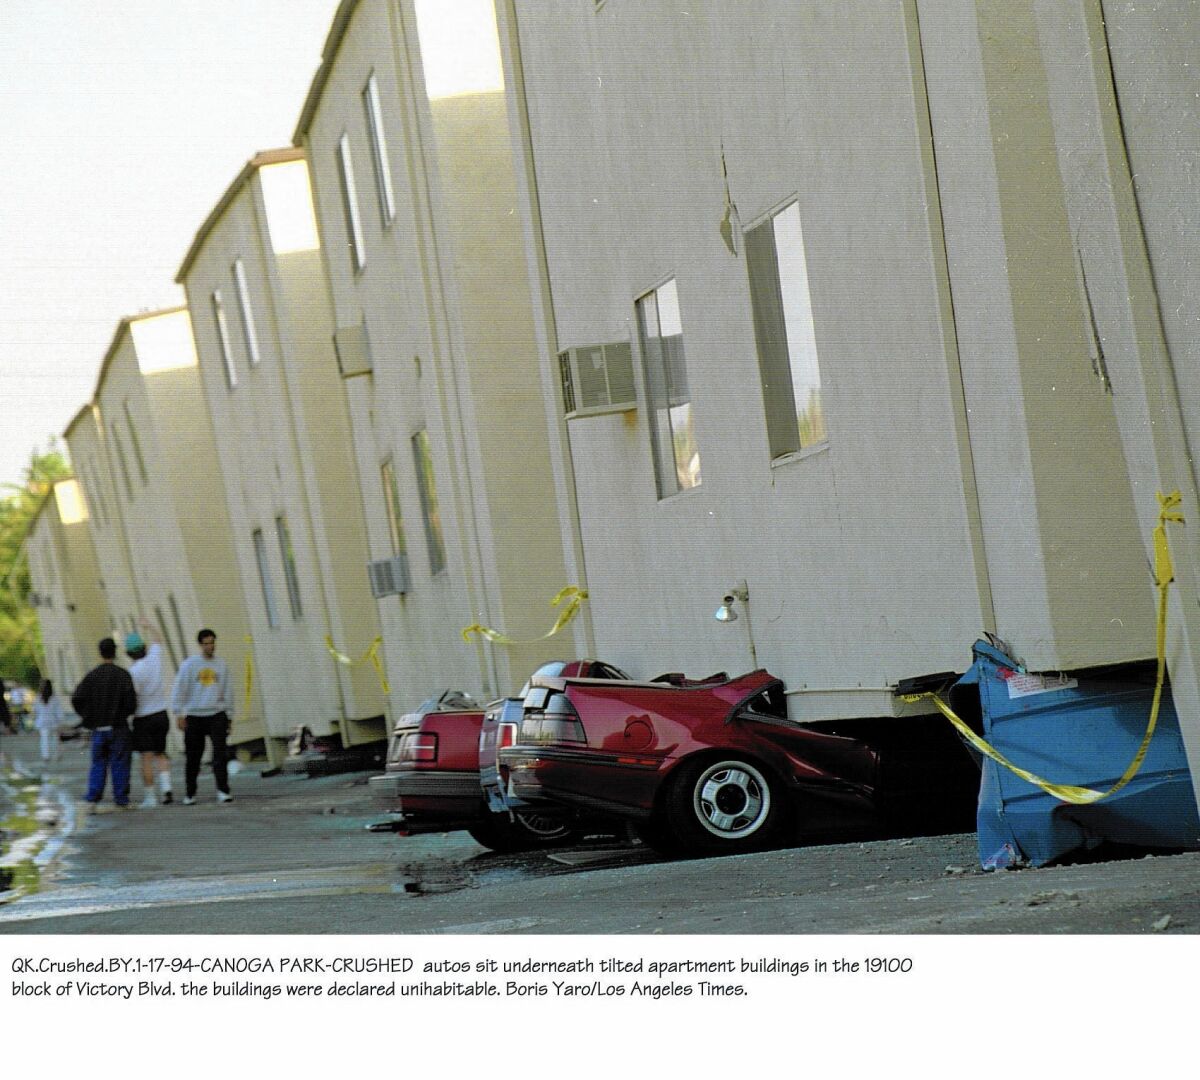 In the 1994 Northridge earthquake, "soft-story" apartment buildings, with weak first floors, collapsed. The city is now targeting such structures in its quake retrofit plans.